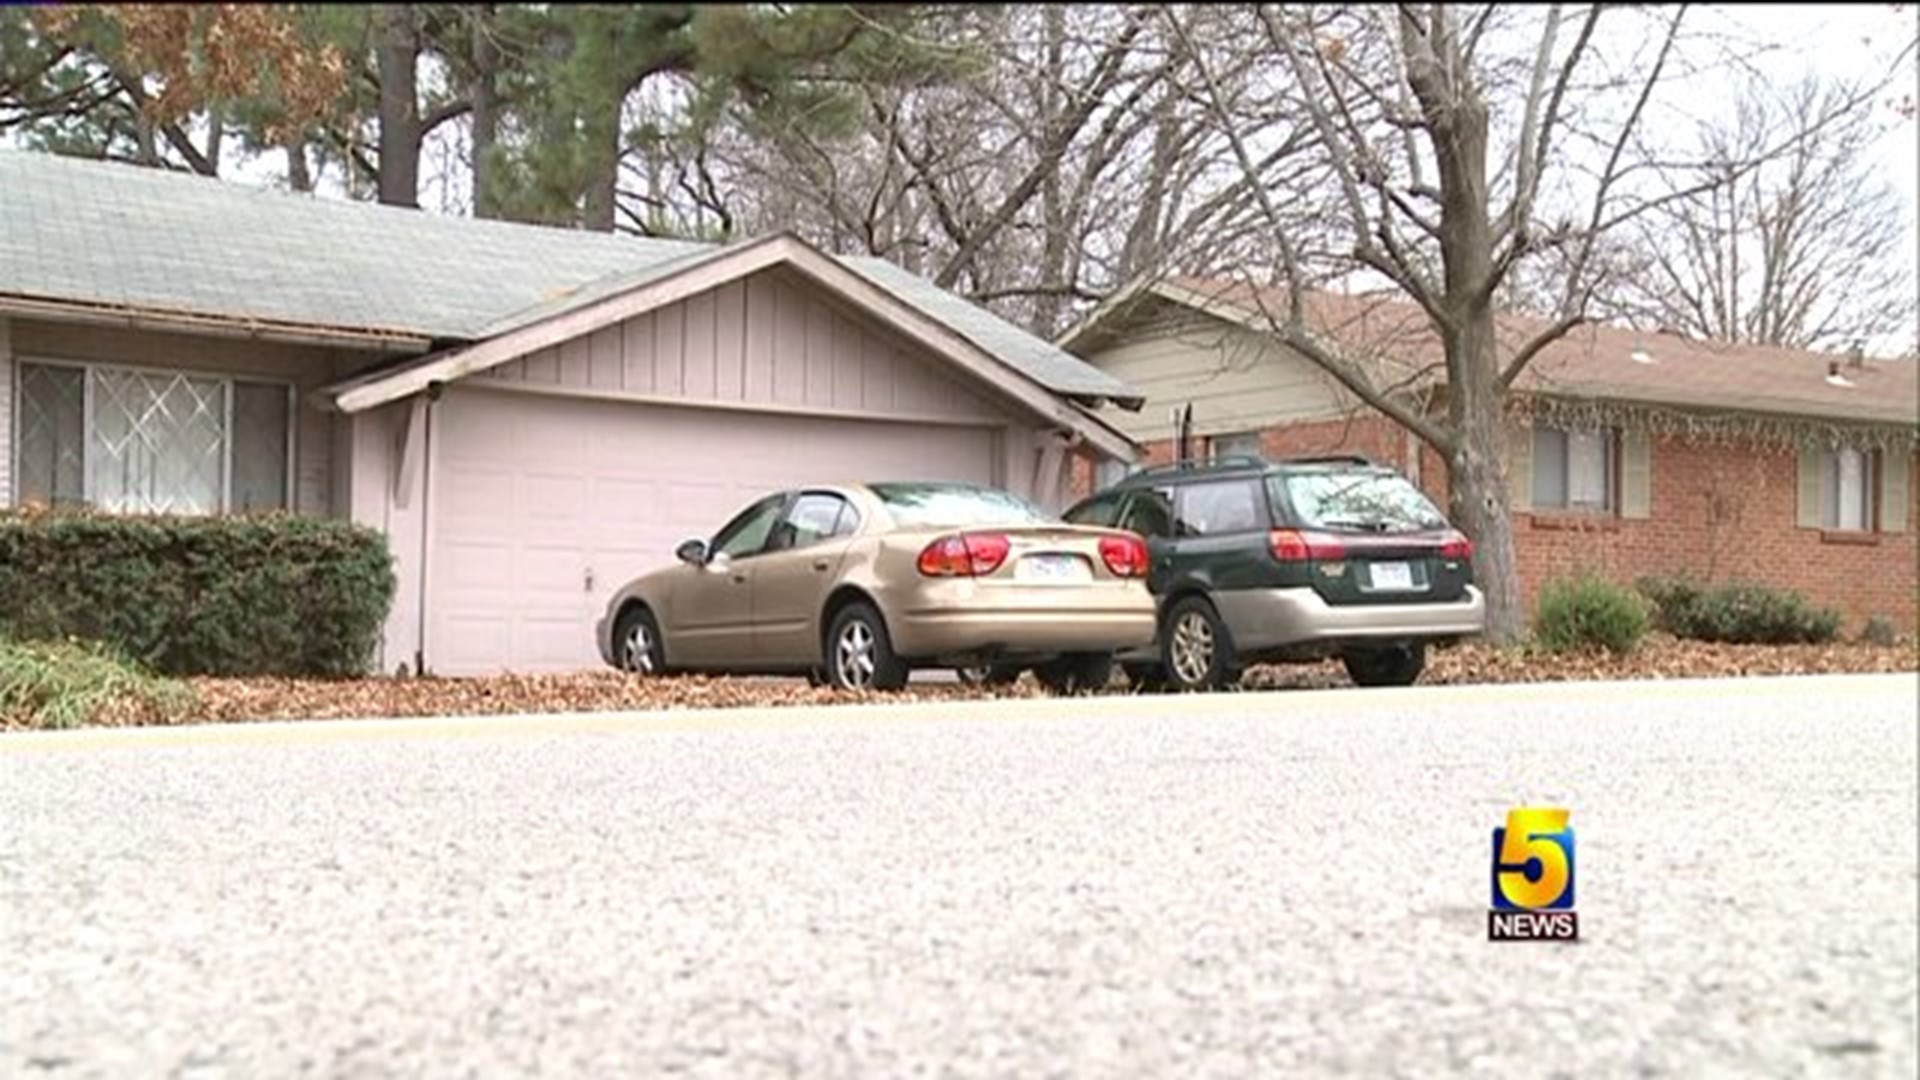 Fayetteville Police Respond To Multiple Break-In Calls Morning After Christmas